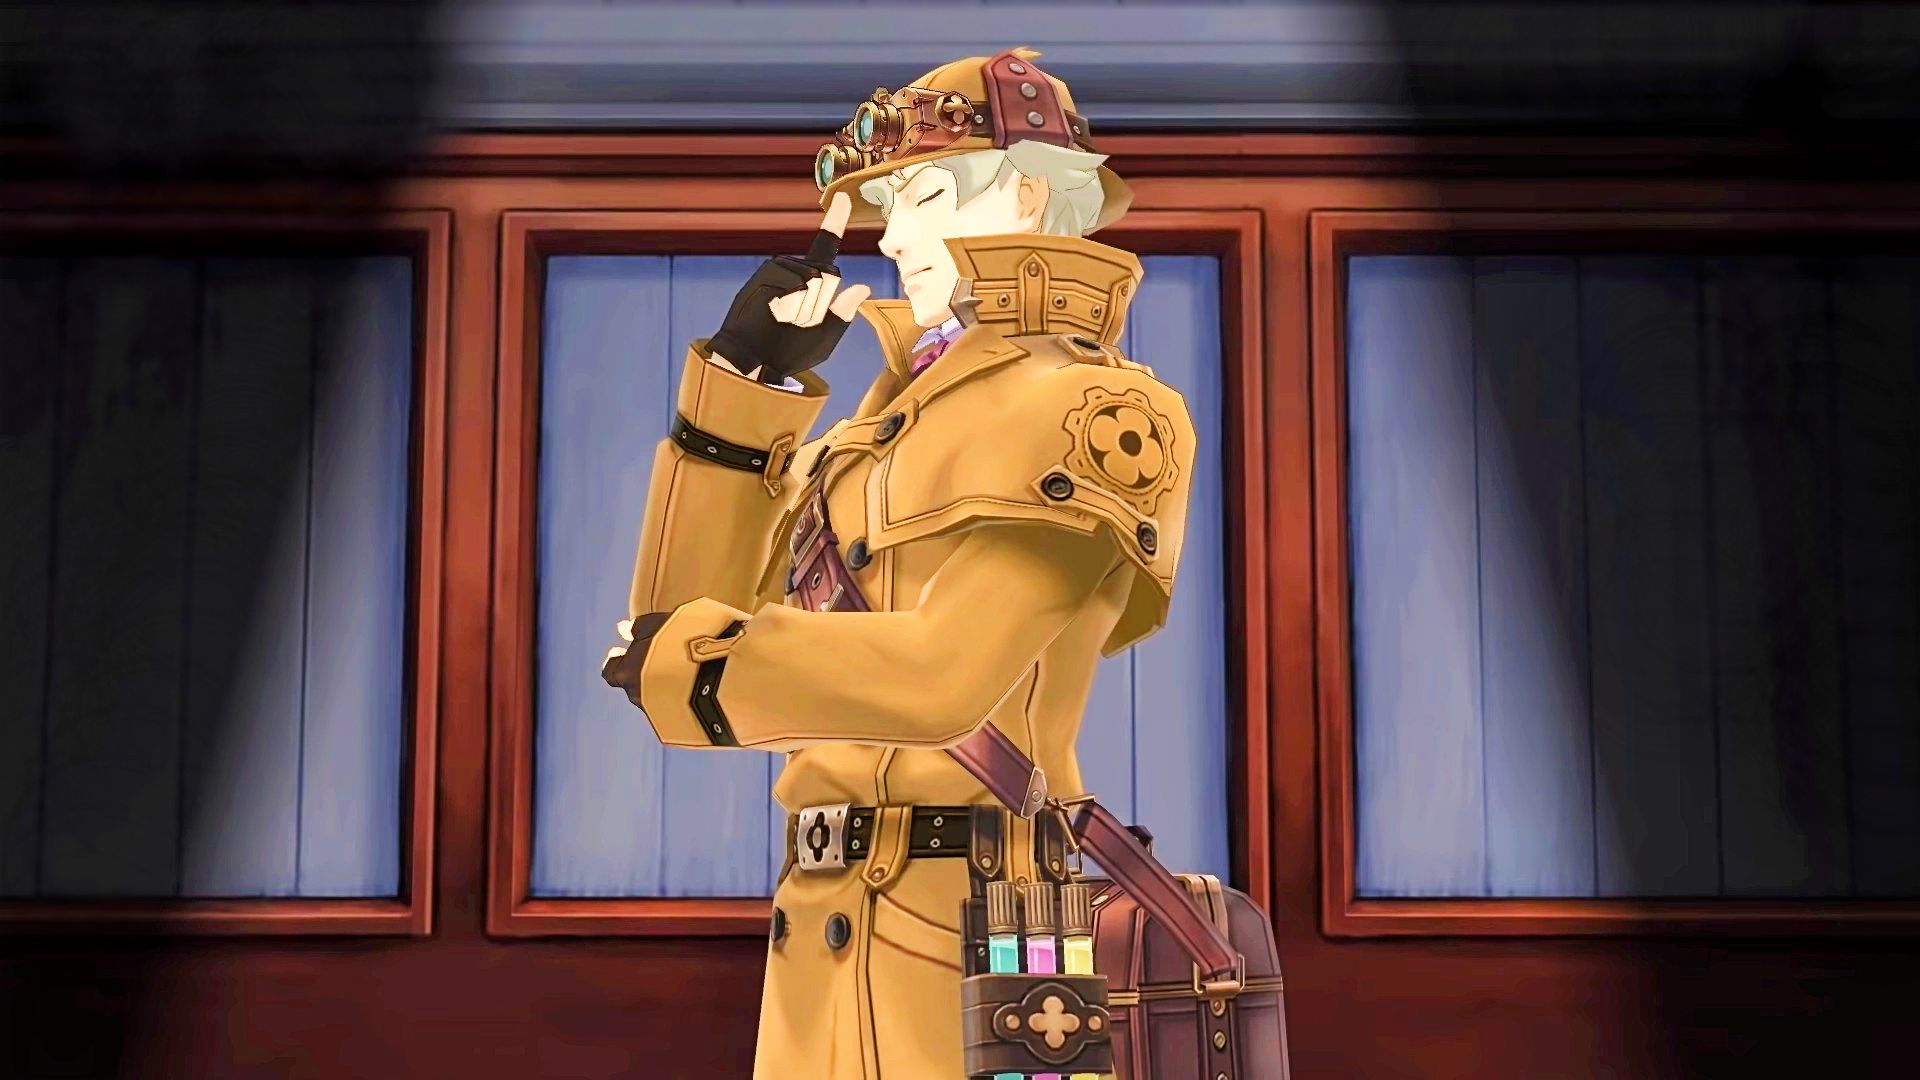 Best anime games: The Great Ace Attorney Chronicles. Image shows the character Herlock Sholmes, a parody of Sherlock Holmes.